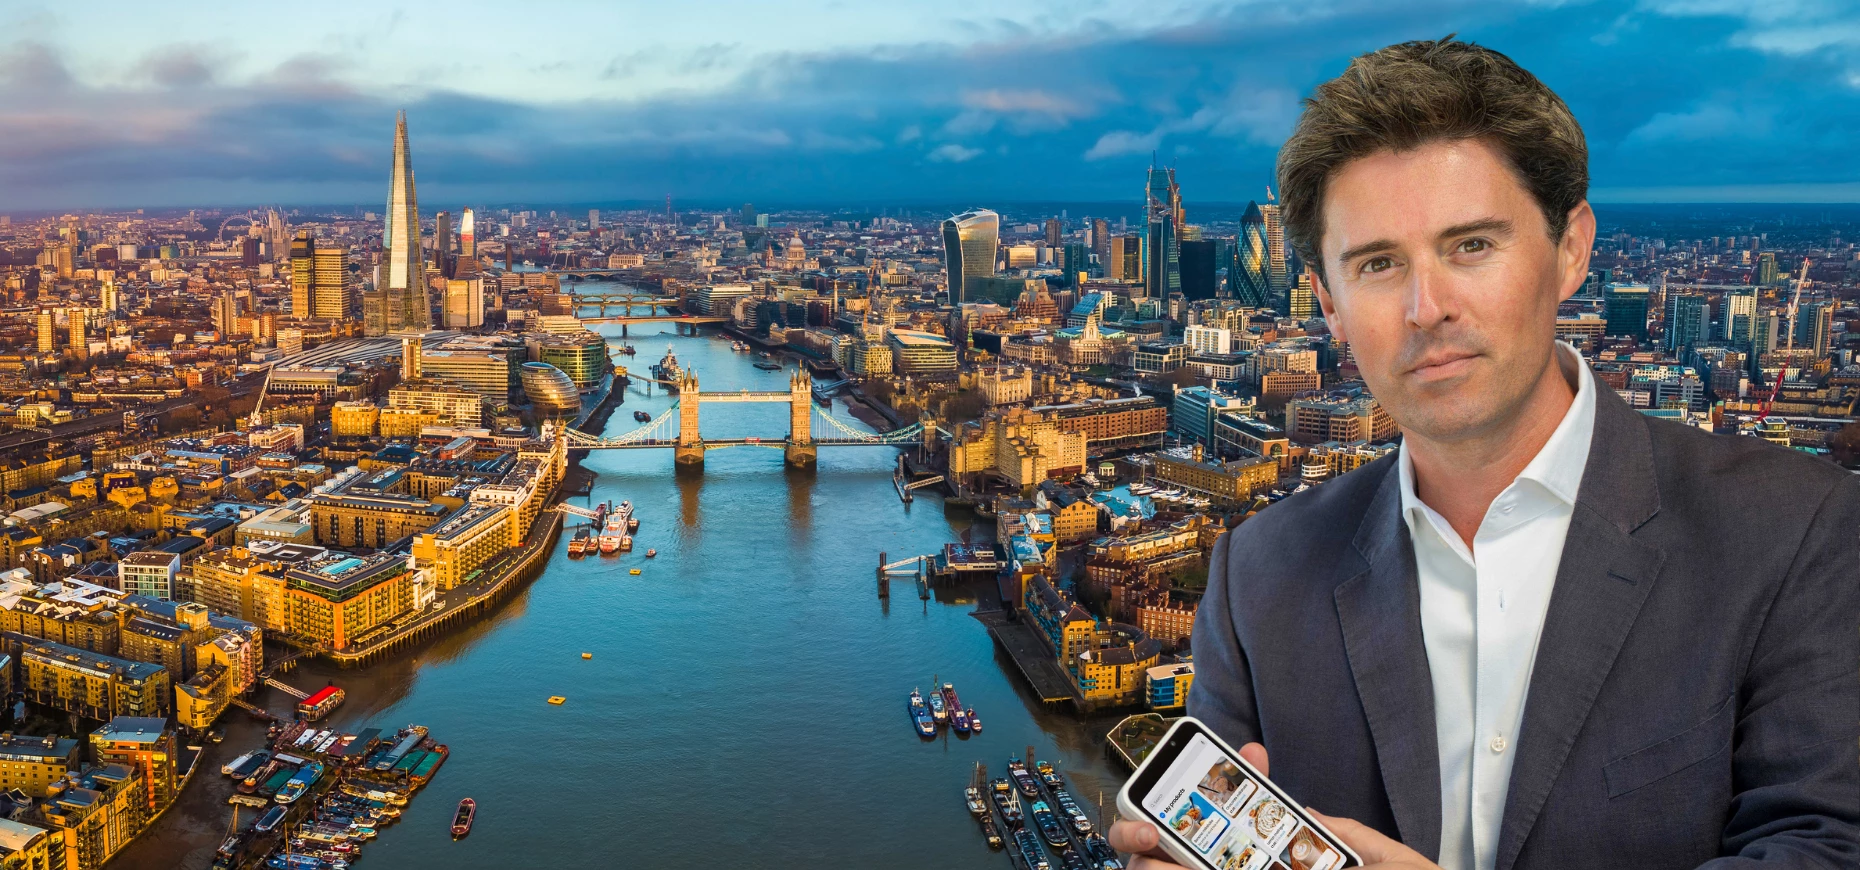 Richard Carter, Founder of Lopay, pictured against the London skyline.